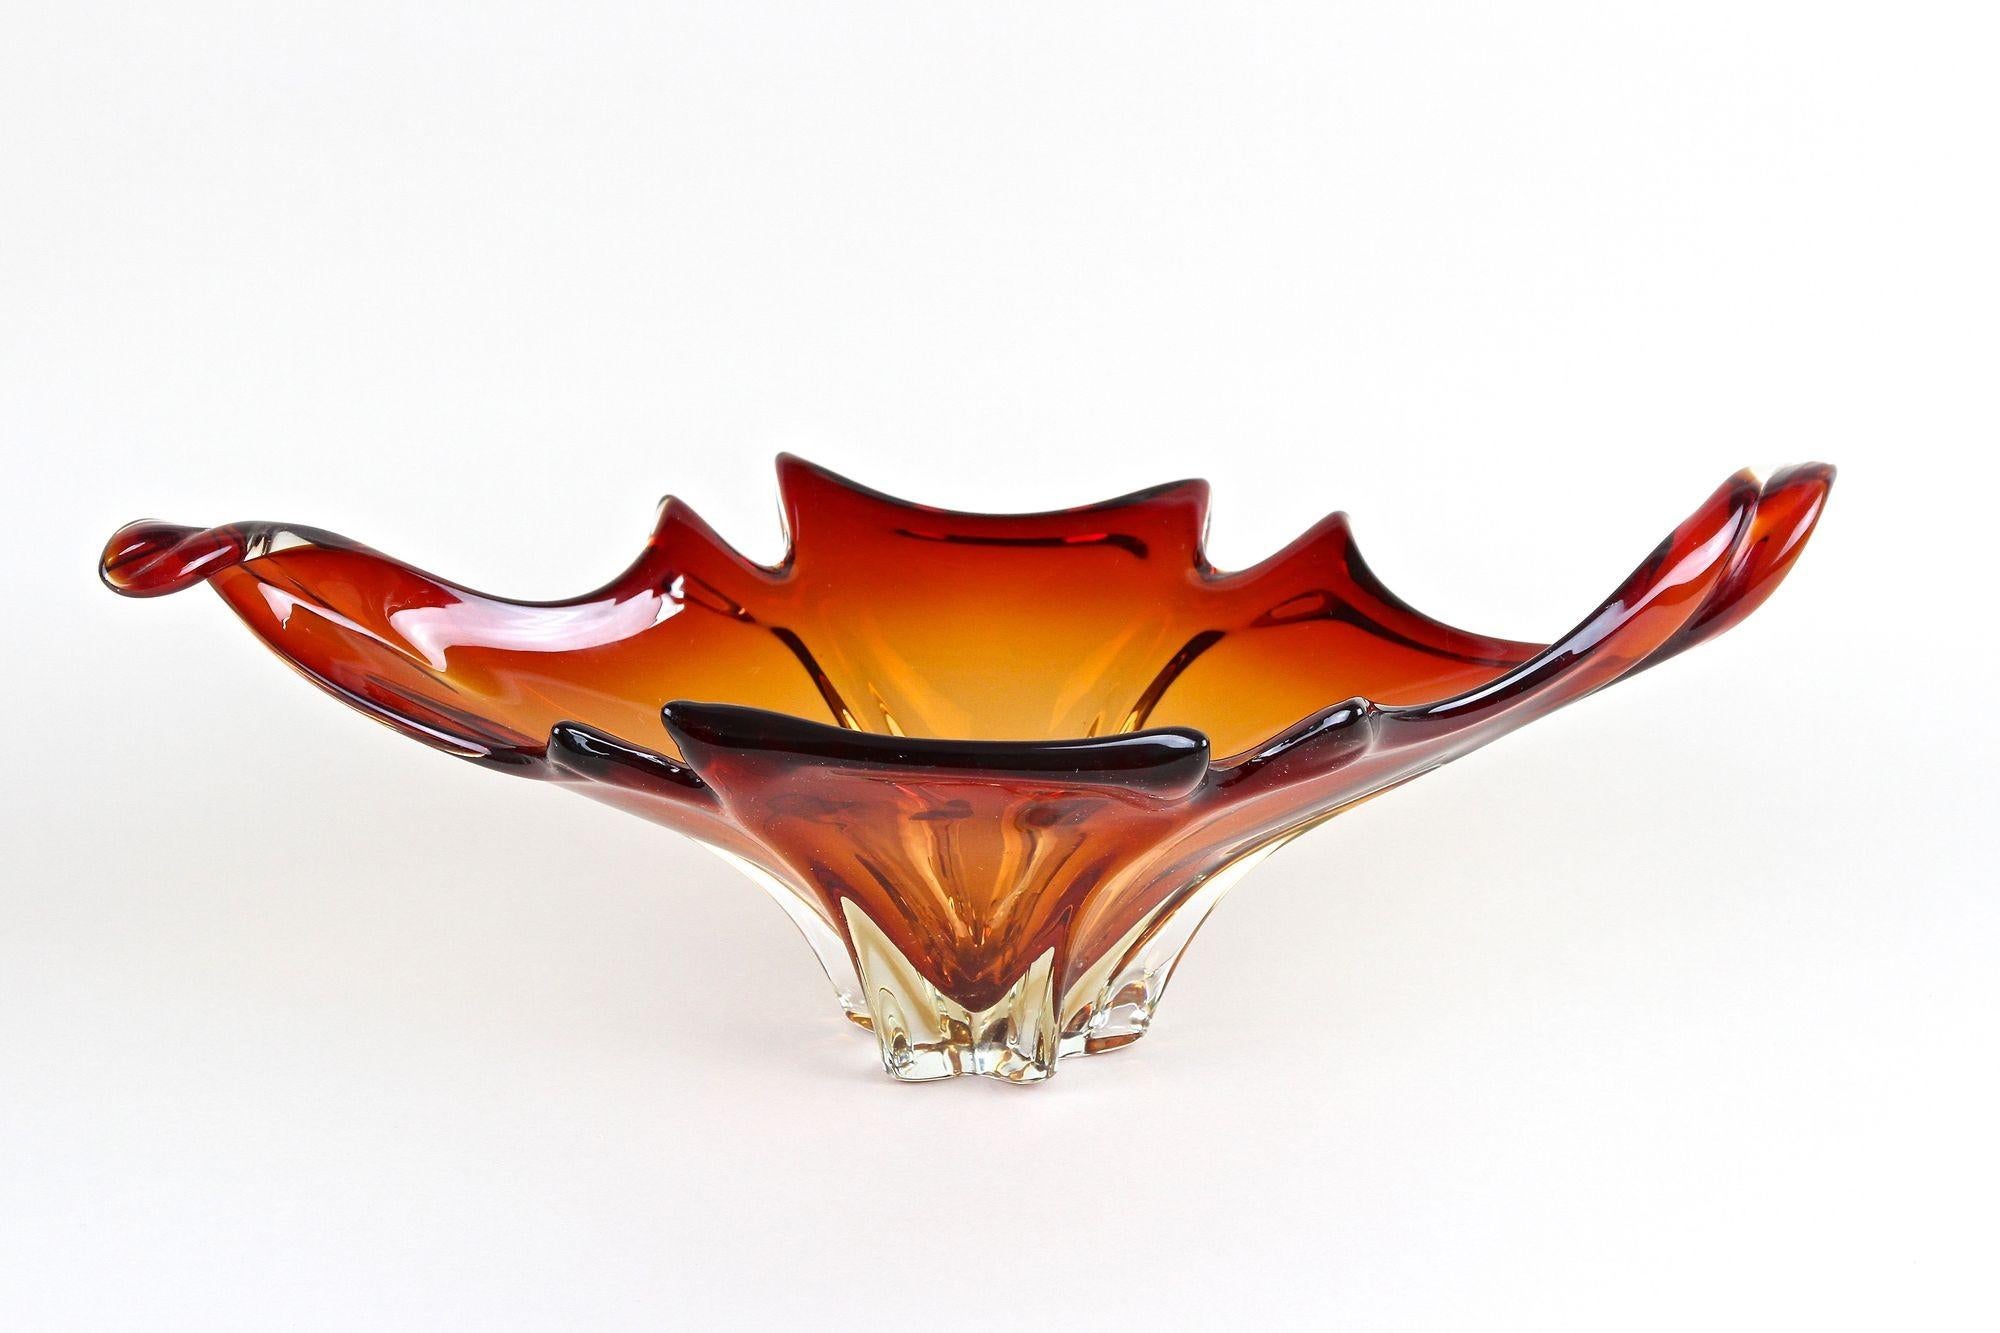 Very decorative large Murano glass bowl out of the renown workshops in Italy from the mid century period around 1960/70. Impressing with its extraordinary shape - just see the gorgeous curled ends - and amazing design in lovely red and orange tones,